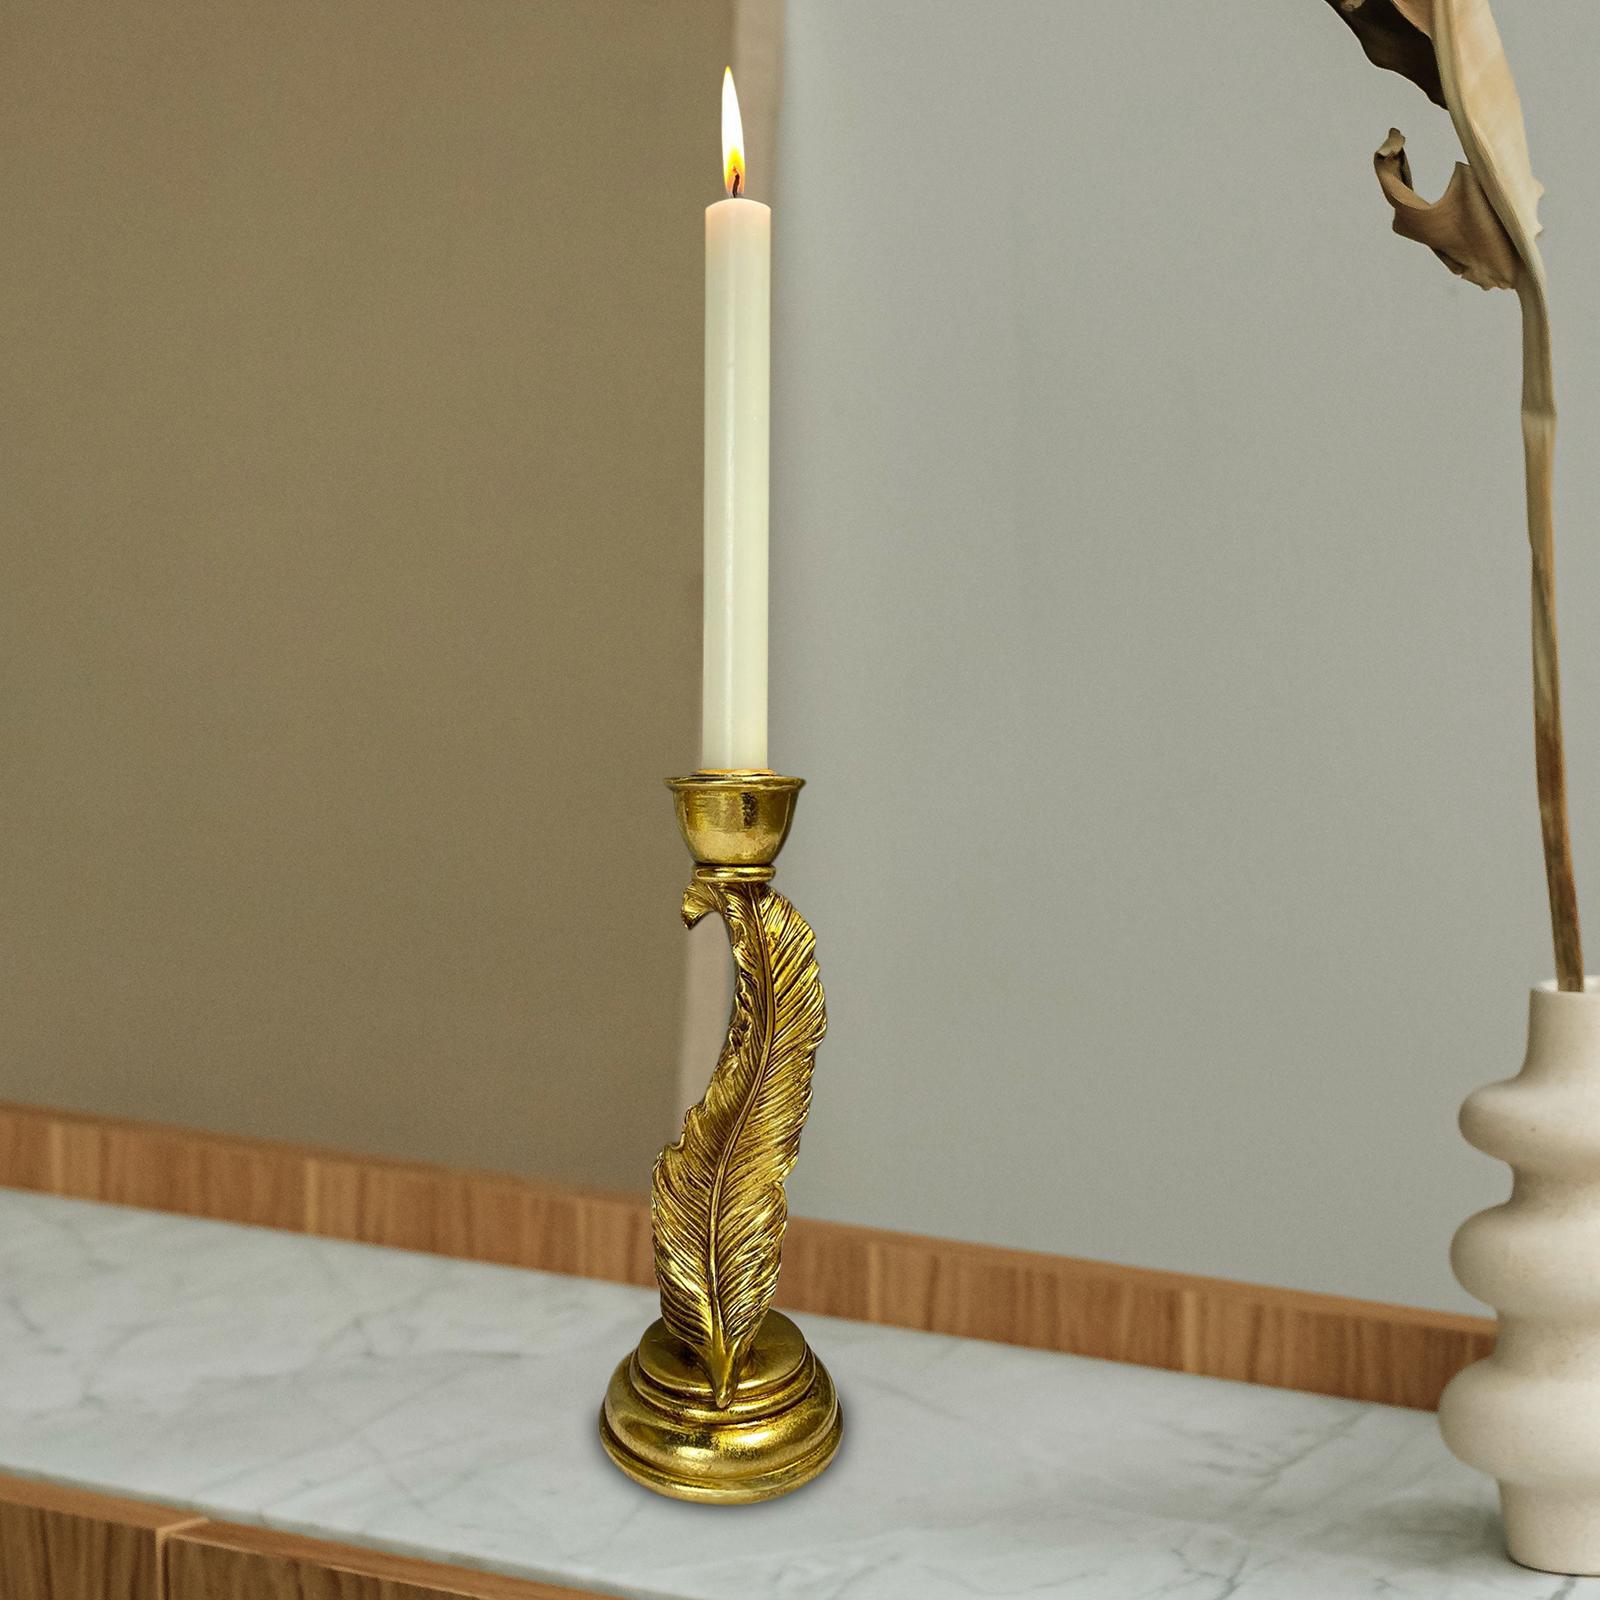 Creative Candle Holder Decorative Candlestick for Home Wedding Party Desktop Gold